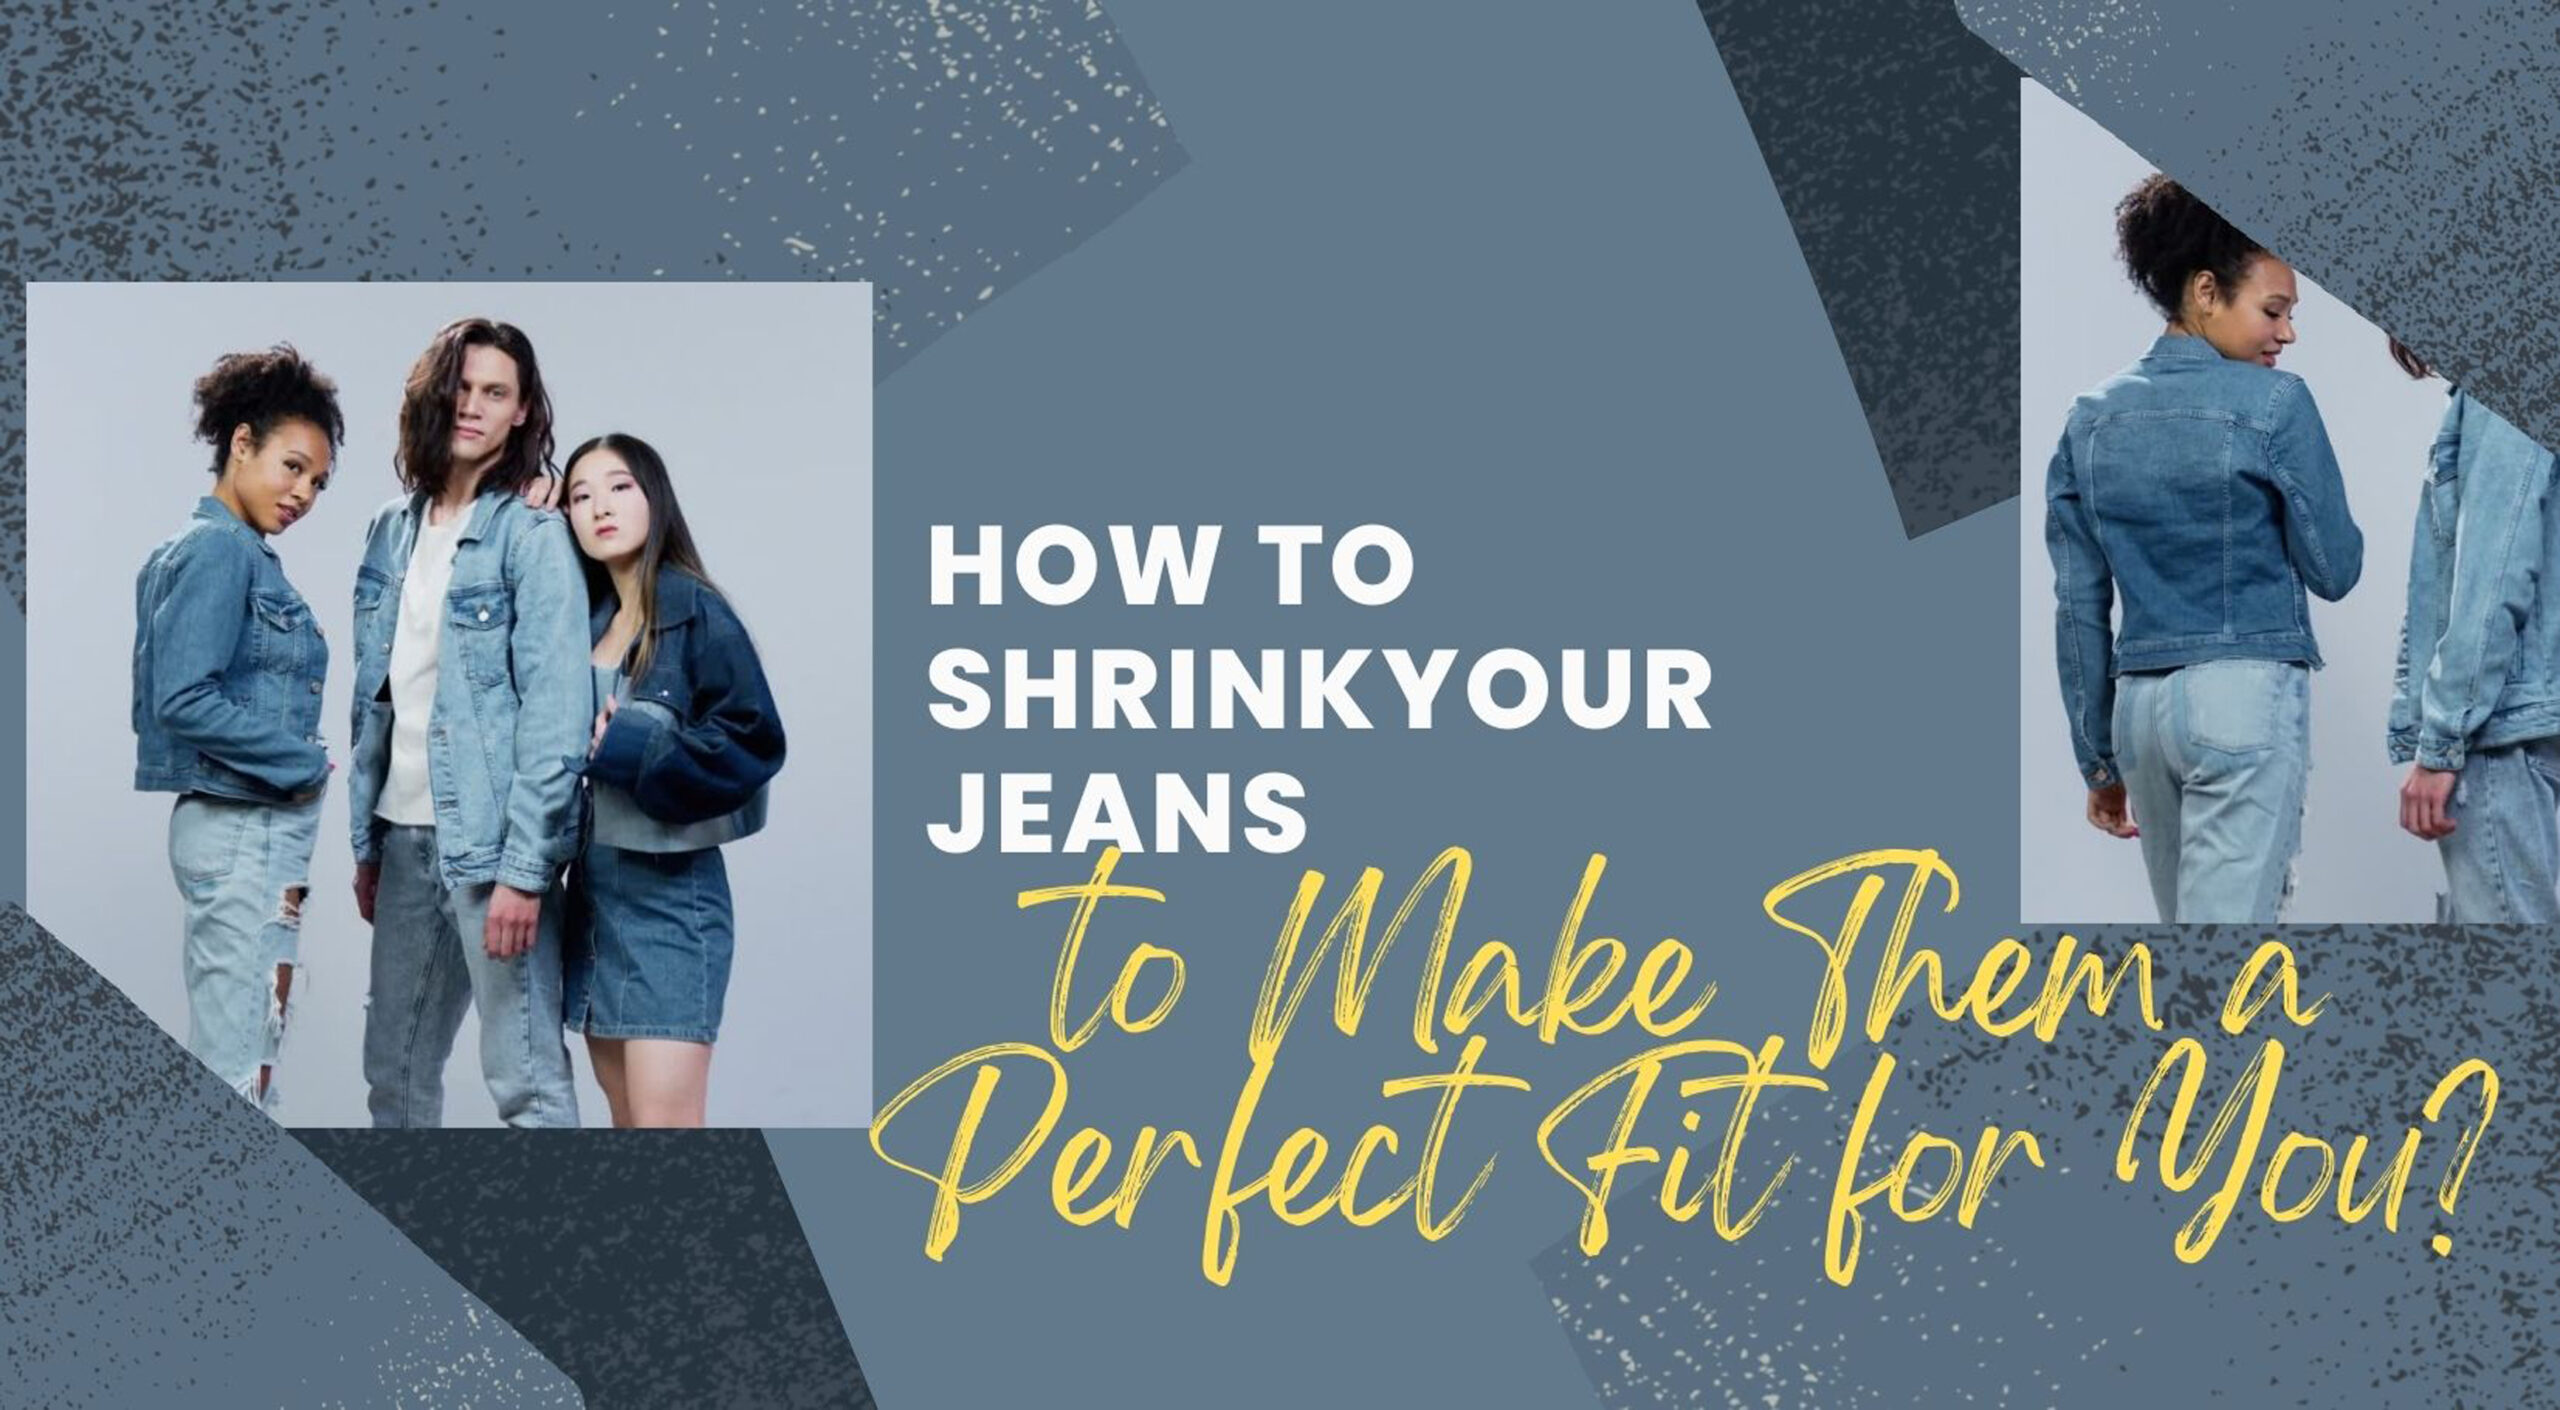 How to Shrink Your Jeans to Make Them a Perfect Fit for You?